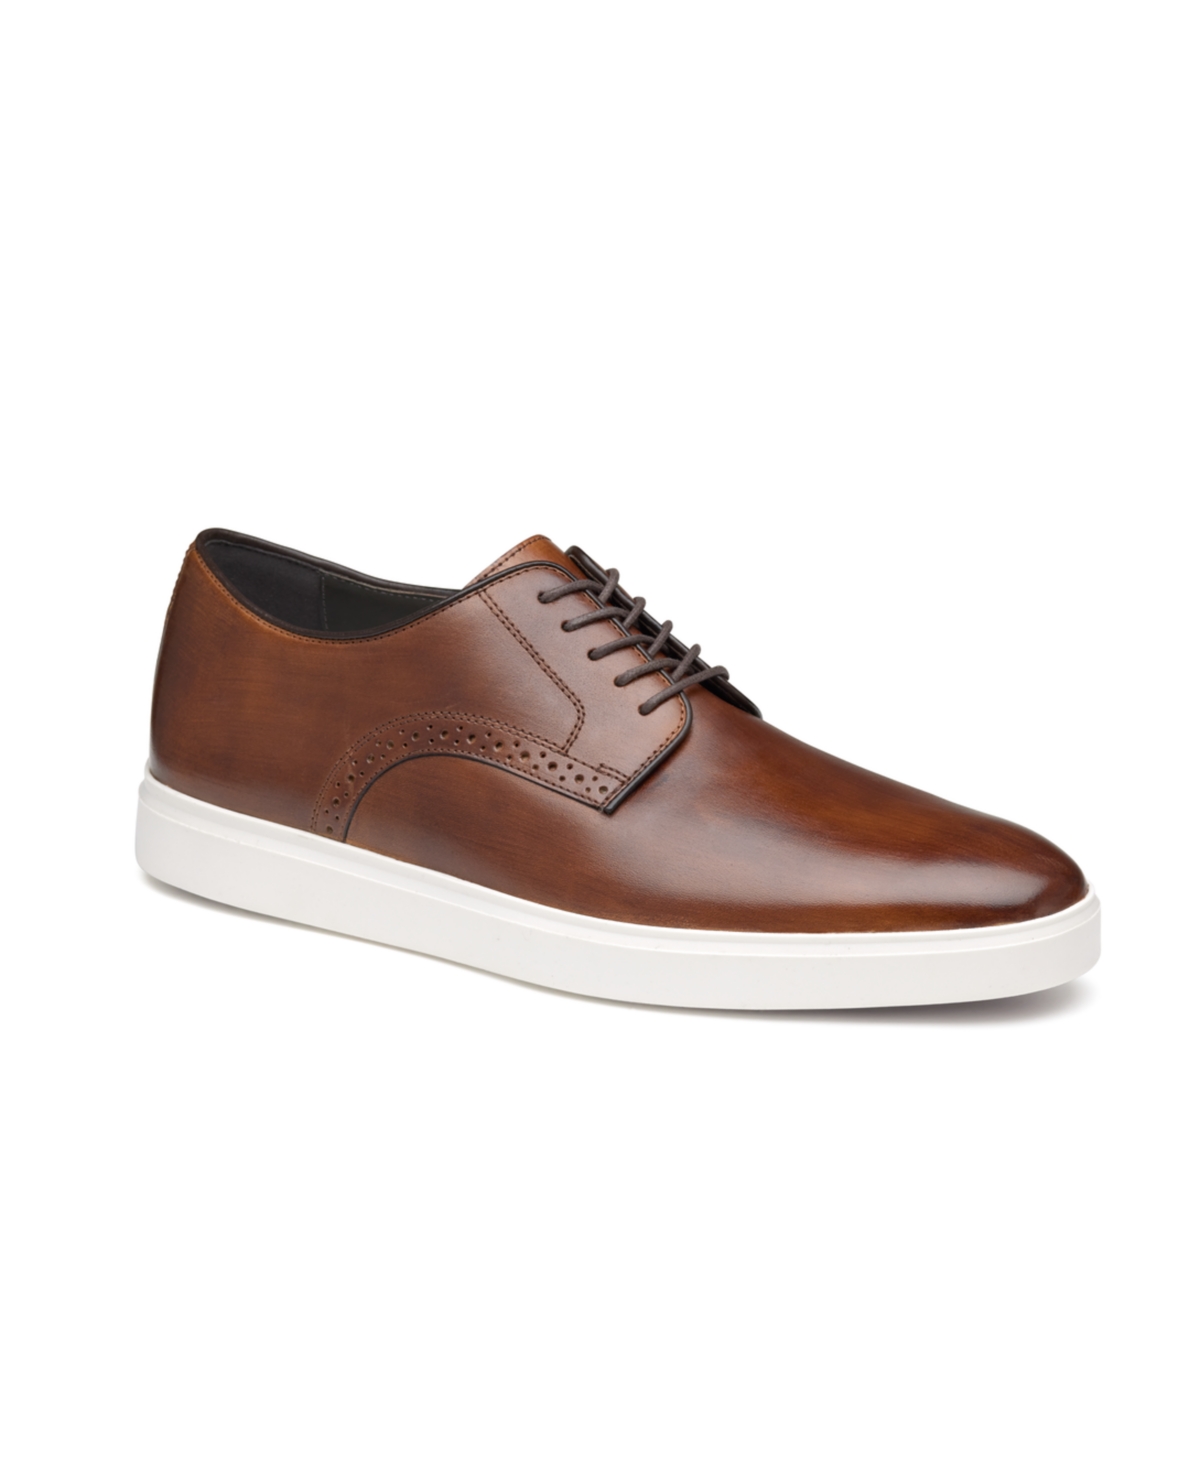 Men's Brody Plain Toe Lace Up Dress Casual Sneakers - Brown